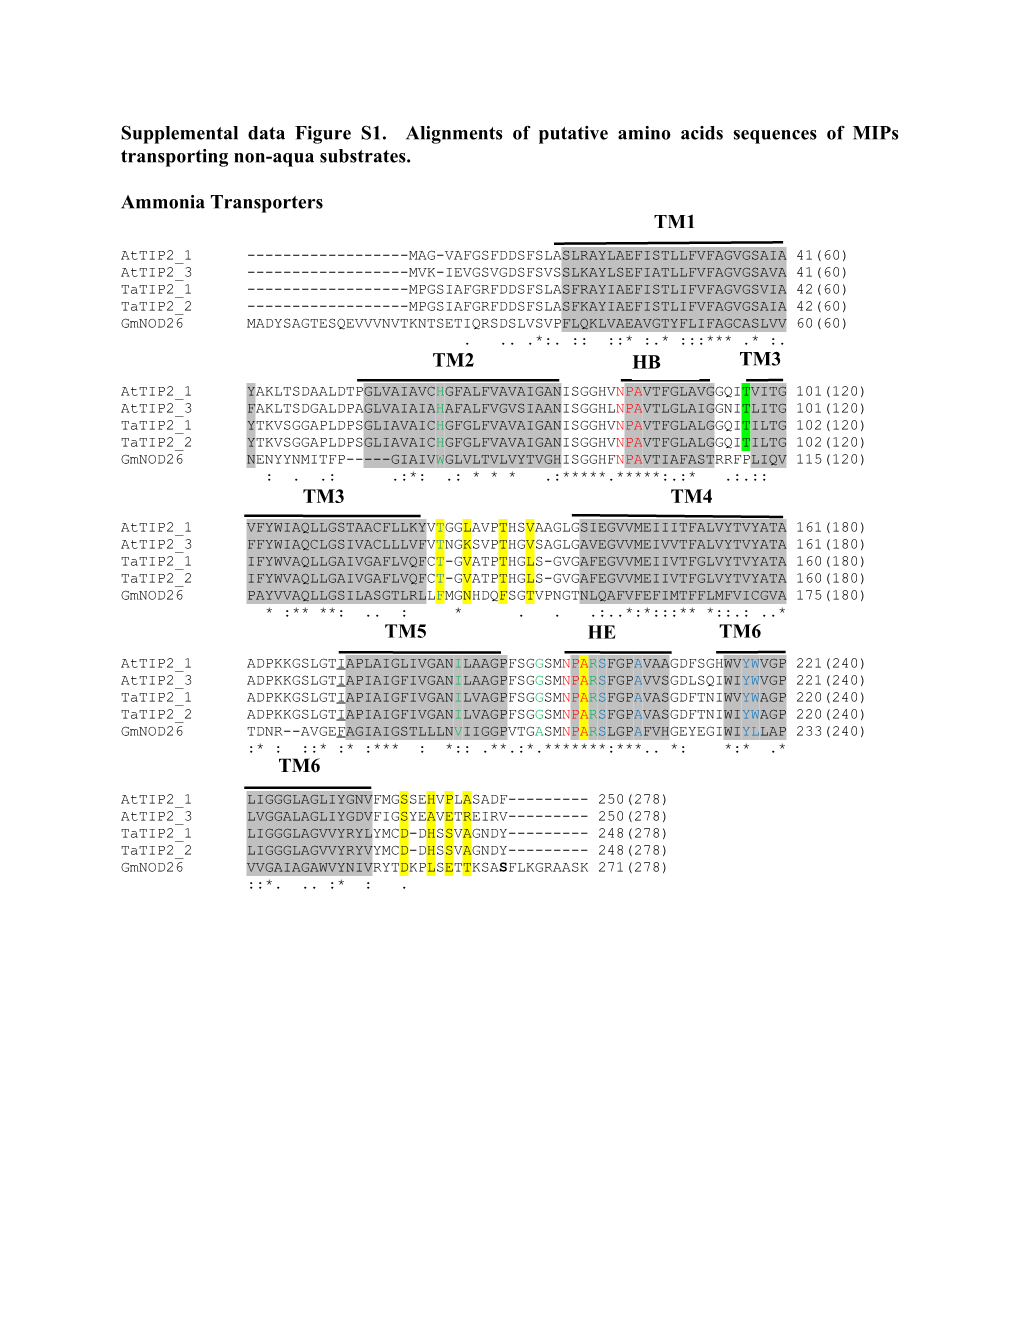 Supplemental Data Figure S1. Alignments of Putative Amino Acids Sequences of Mips Transporting